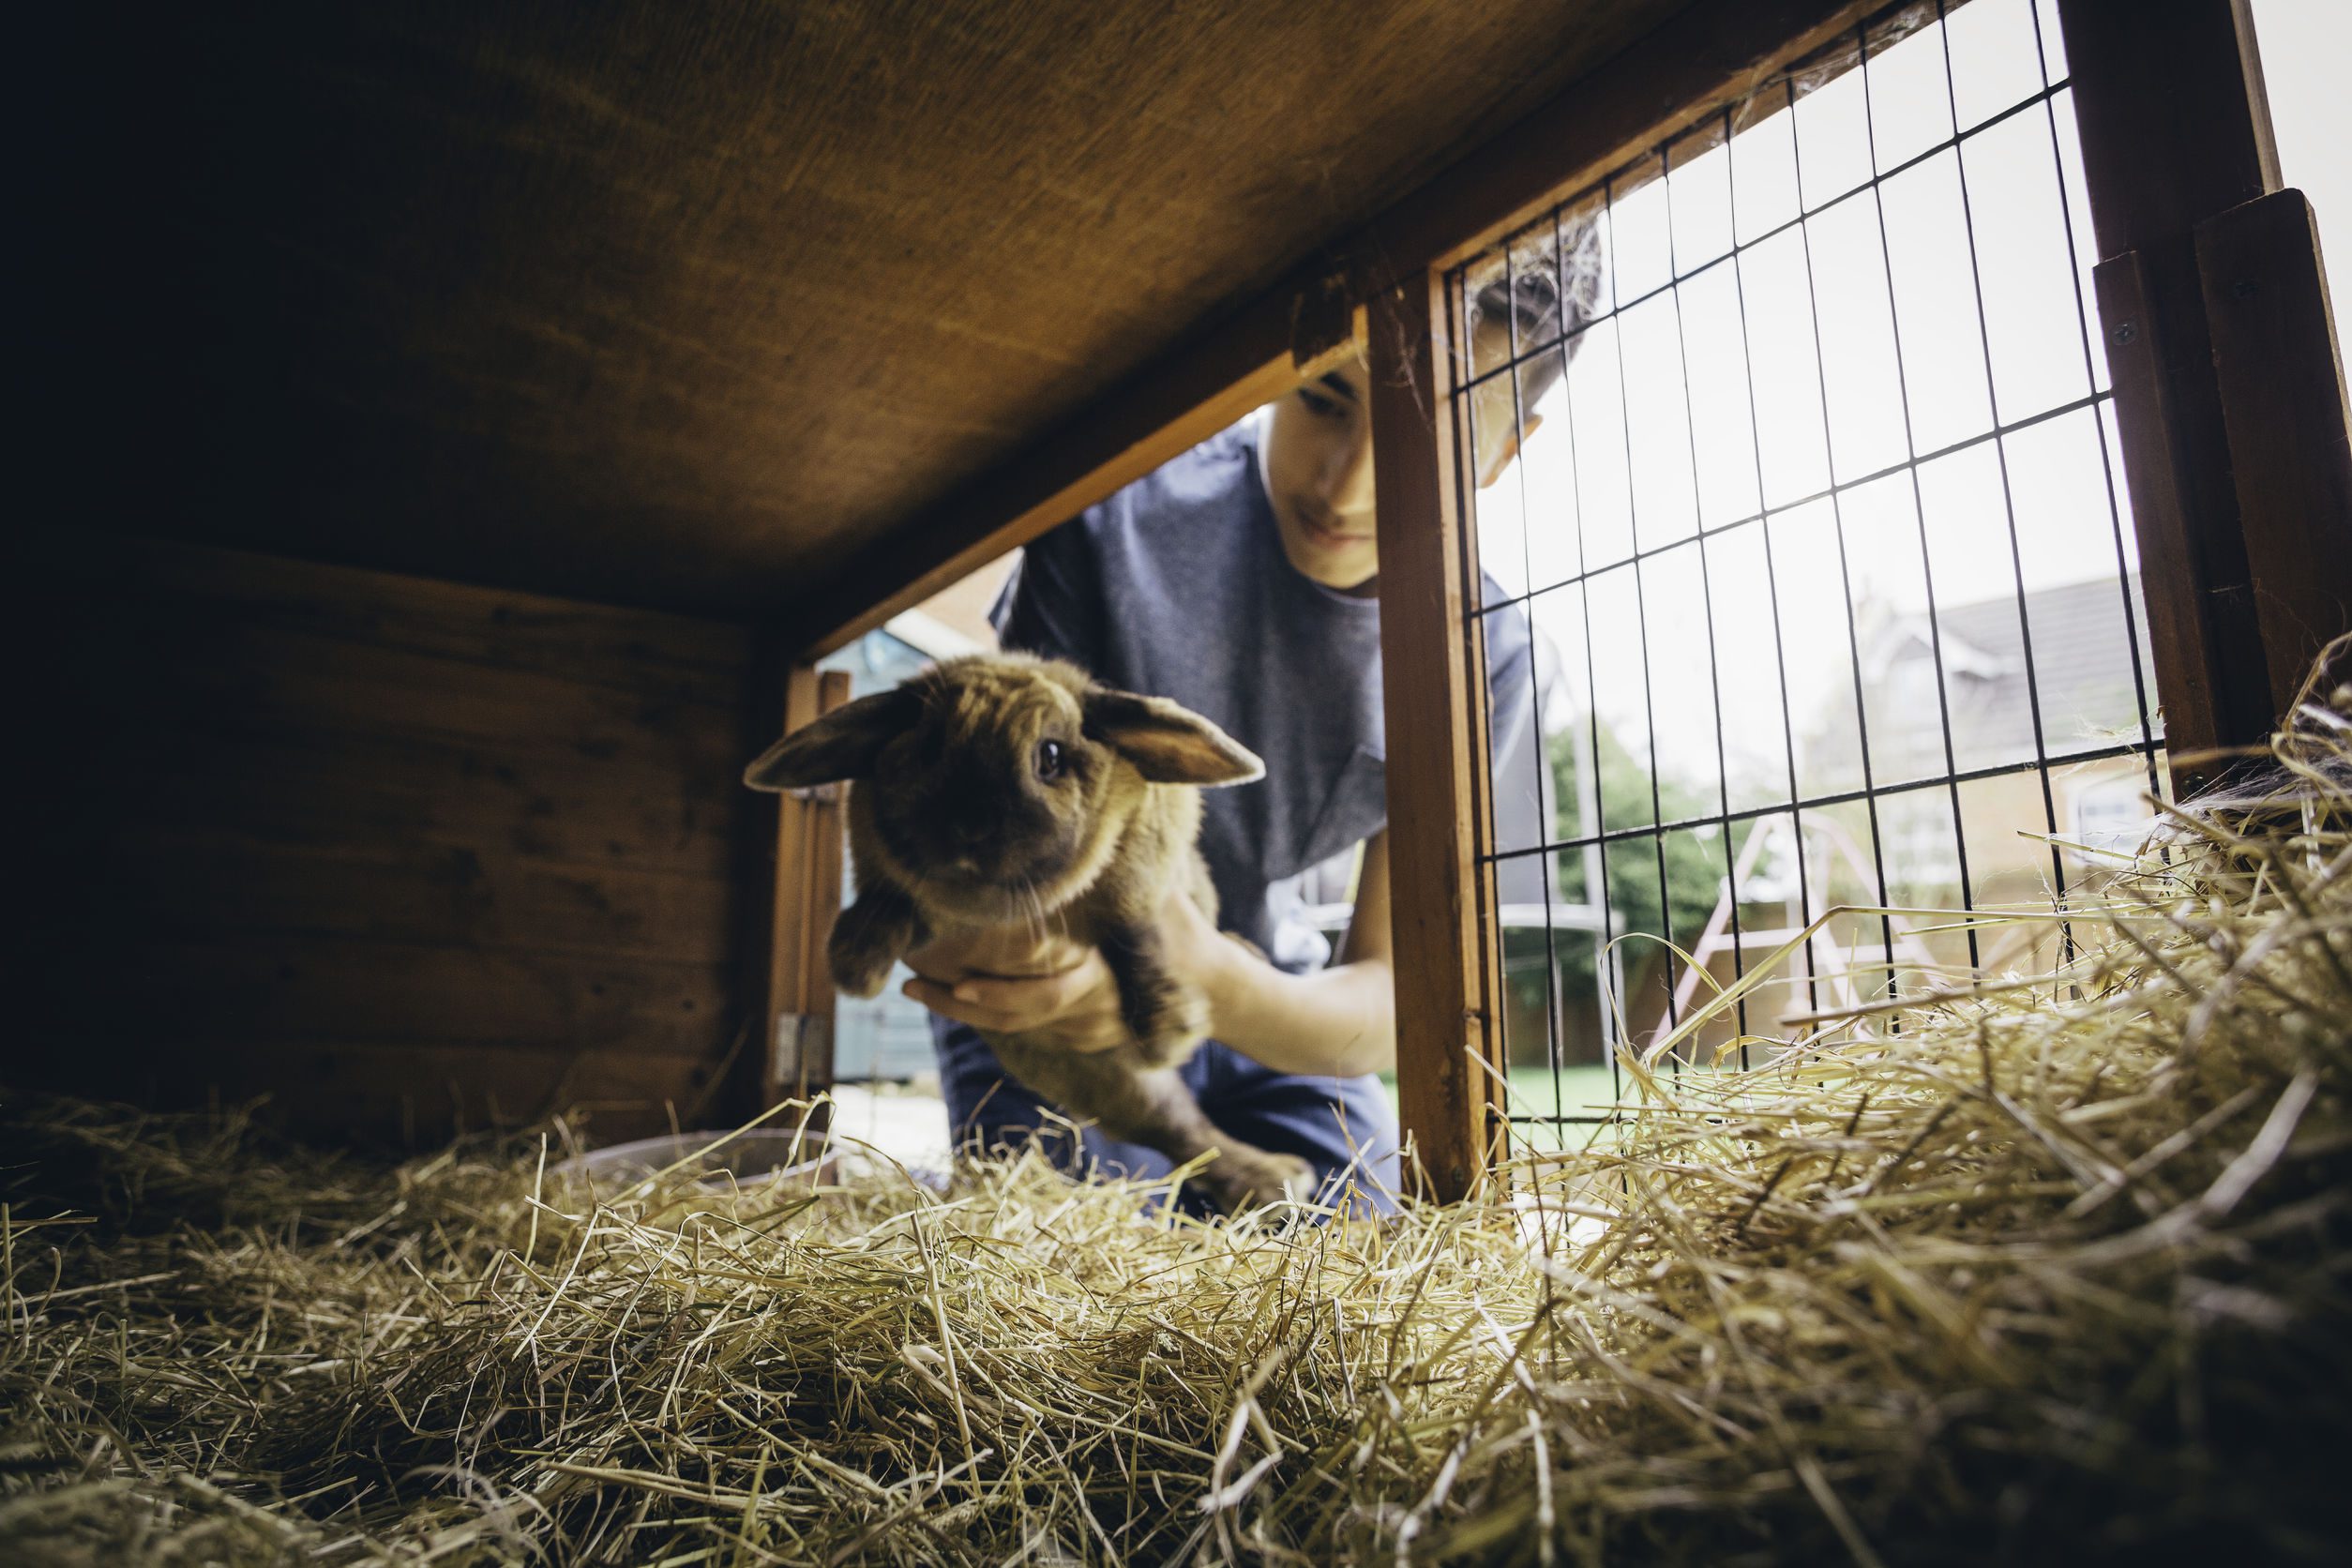 How to Make a Homemade Rabbit Hutch